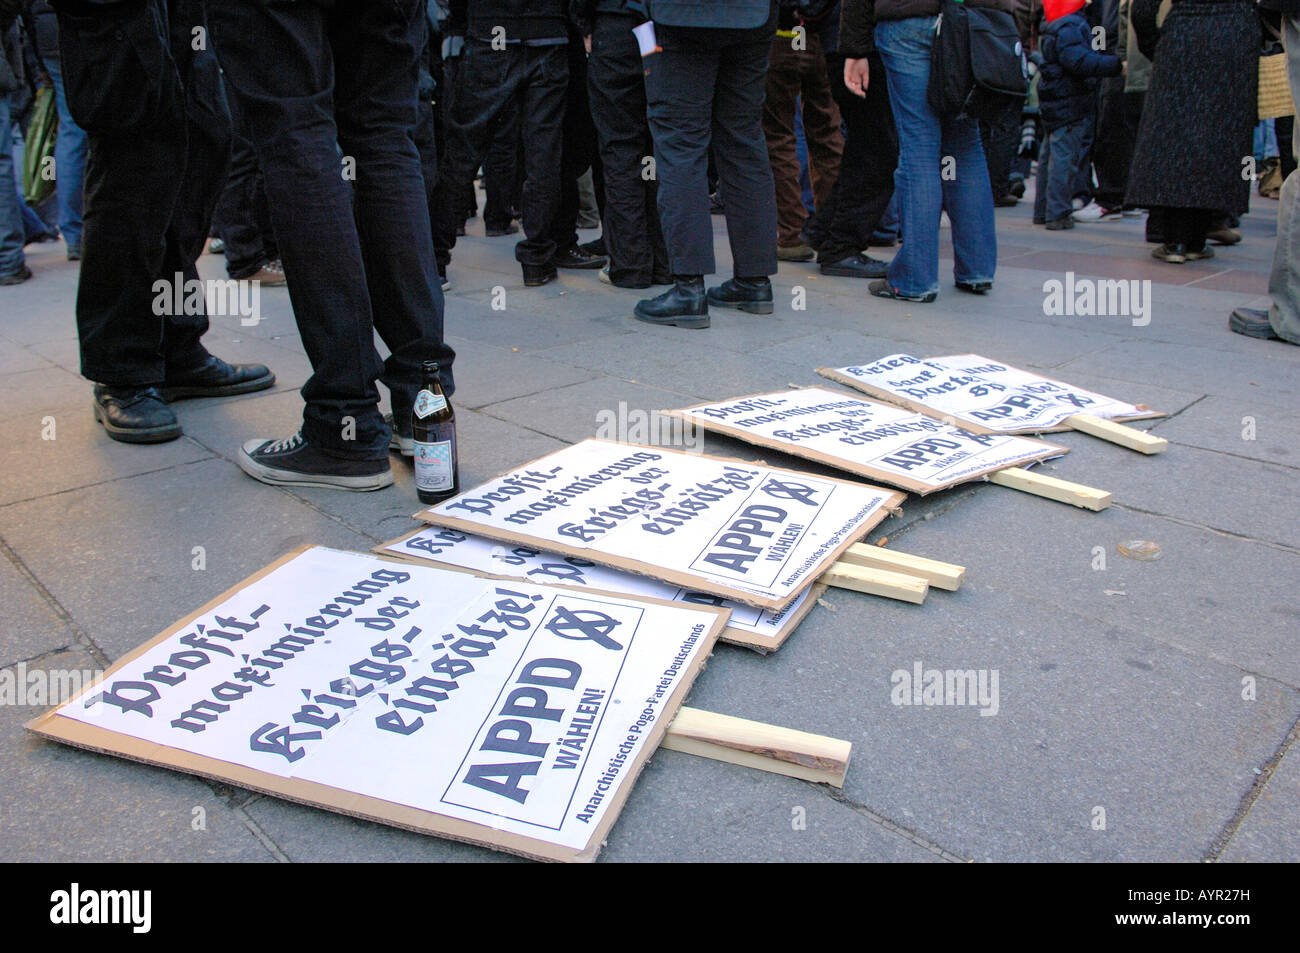 Protest signs at a protest against the 2008 Munich Conference on Security Policy, Munich, Bavaria, Germany Stock Photo